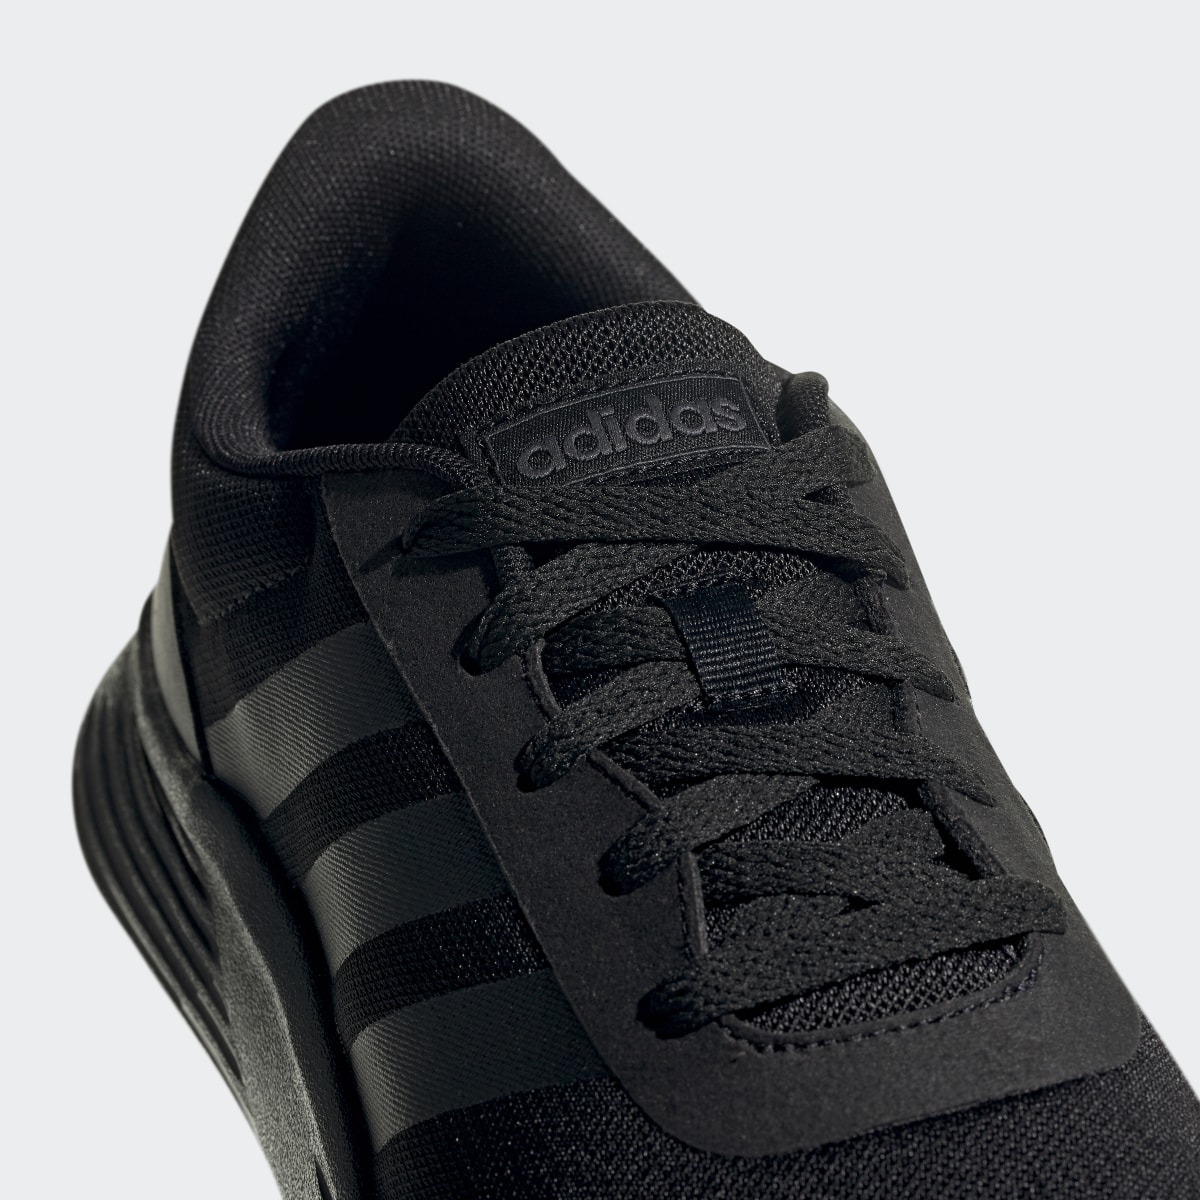 Adidas Lite Racer 2.0 Shoes. 8